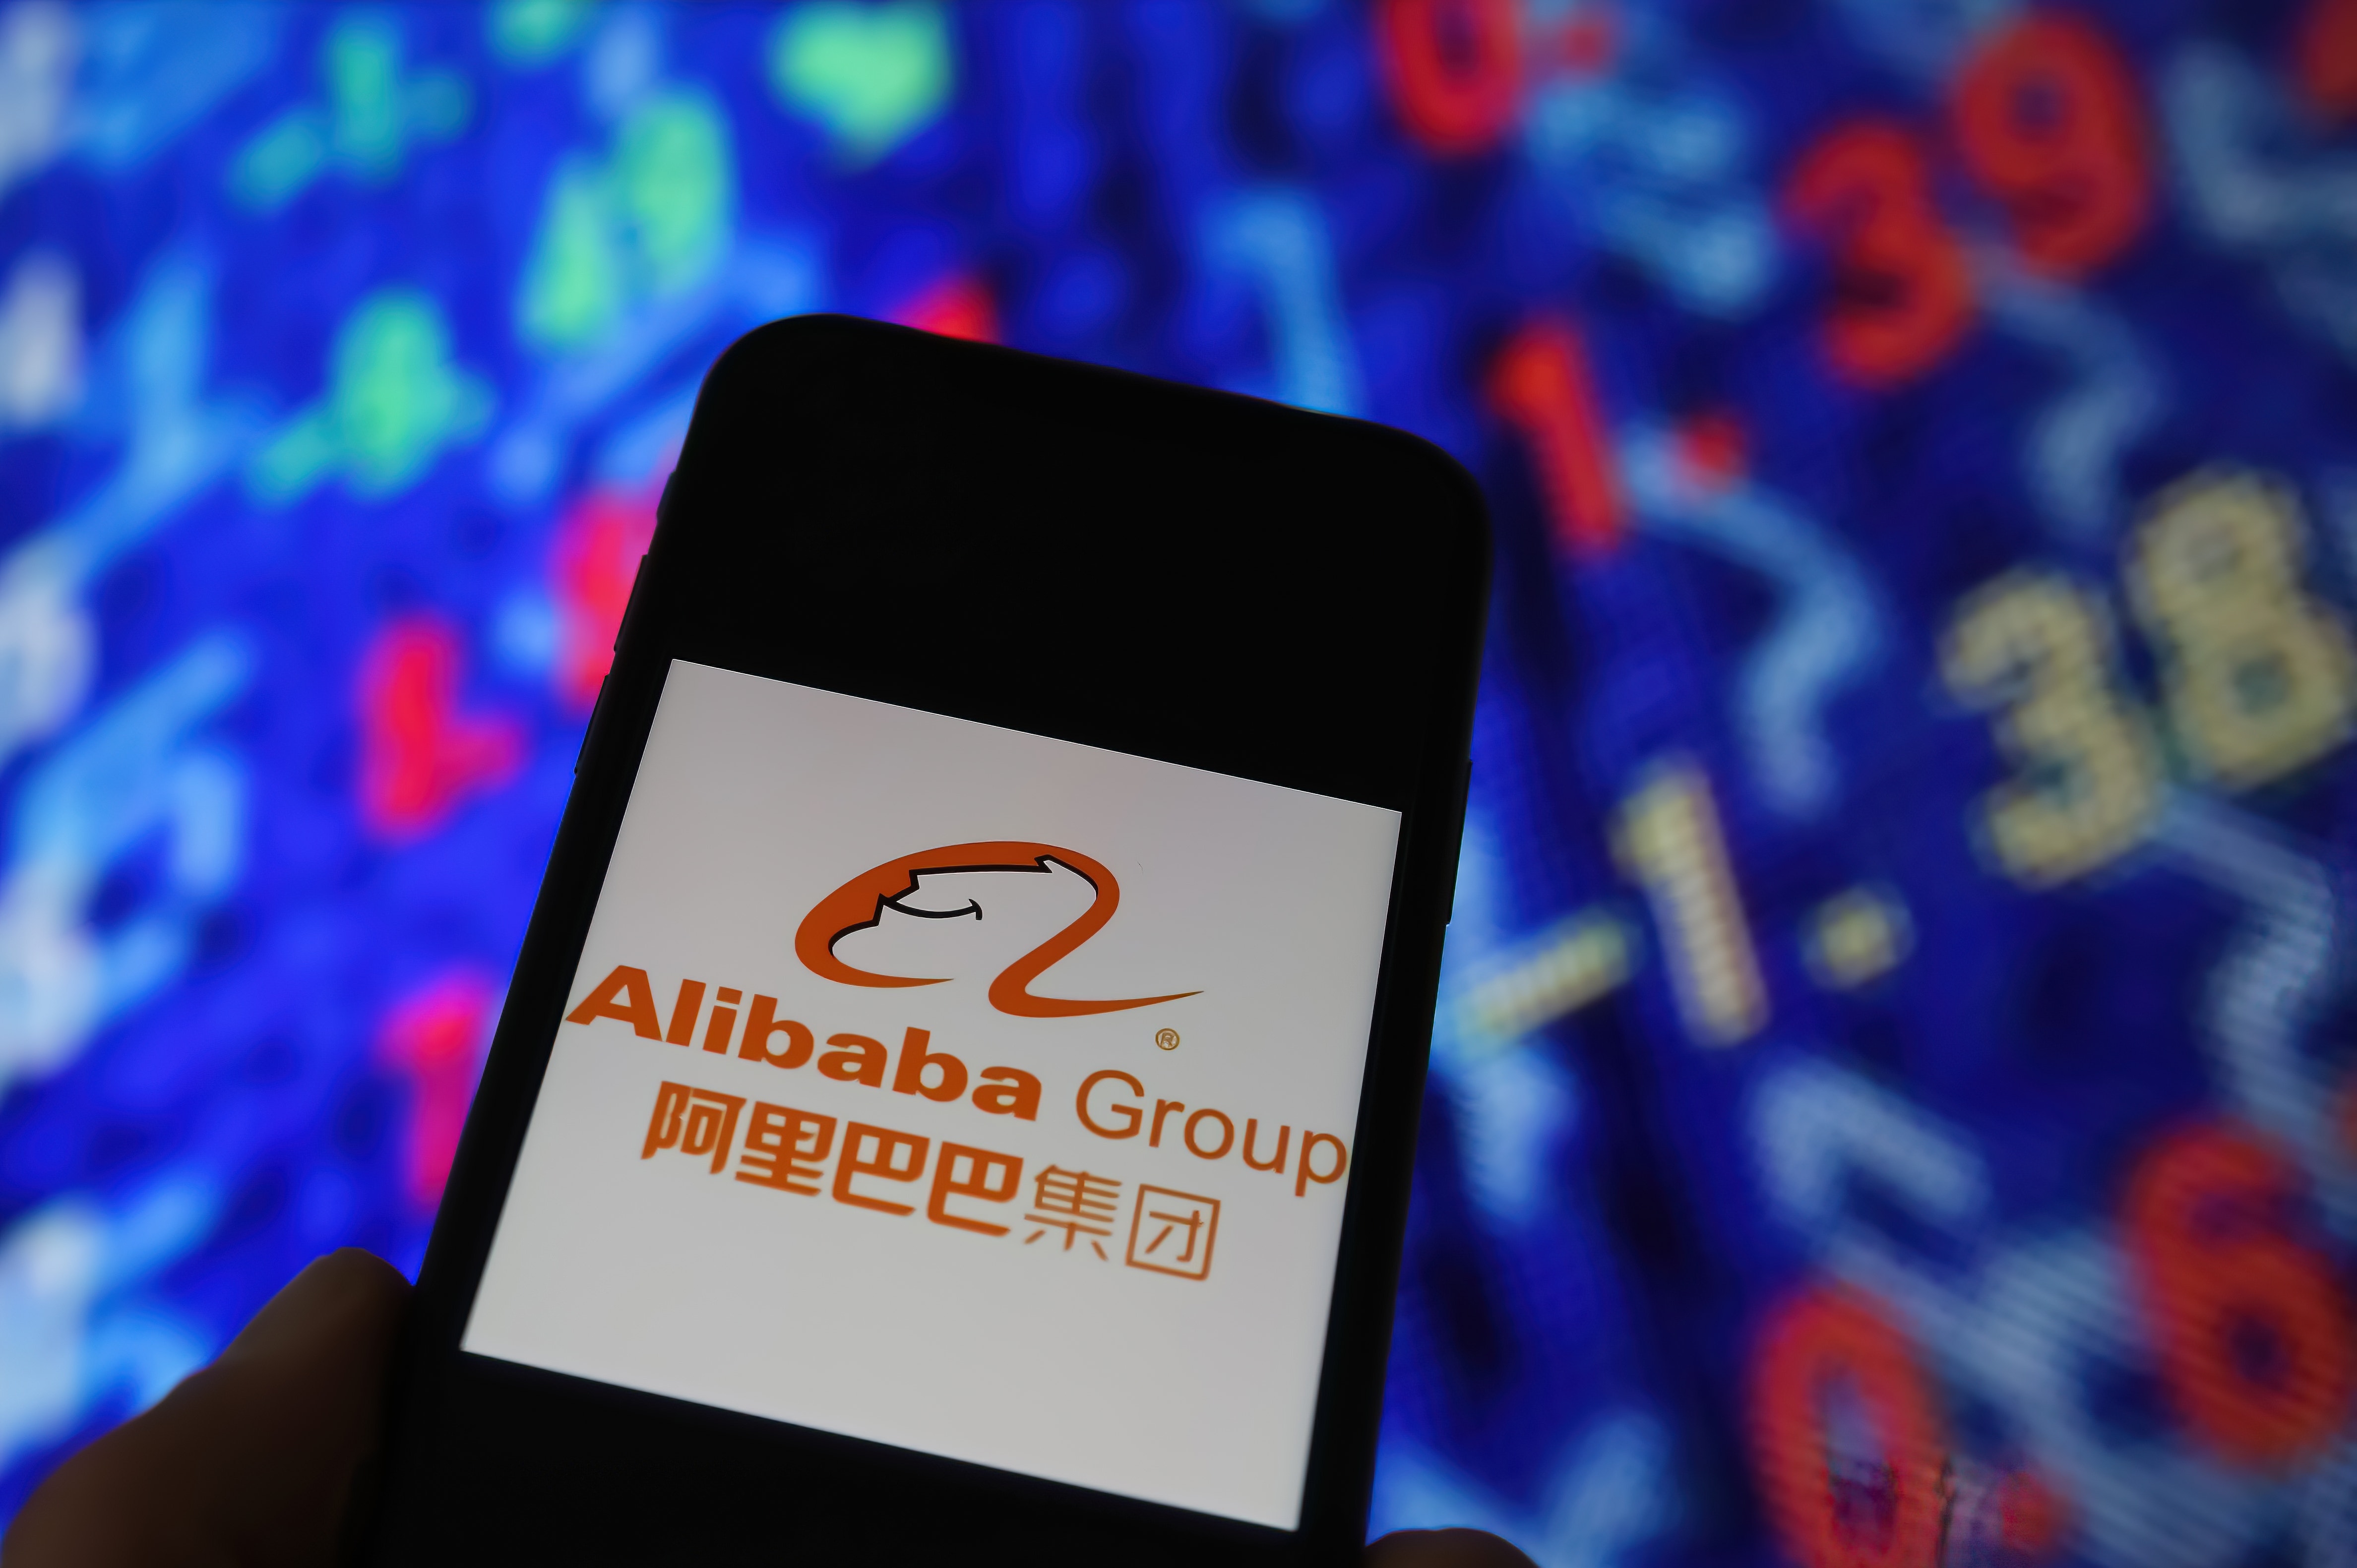 Will Alibaba Be Delisted From NYSE? Here's What The Firm Says